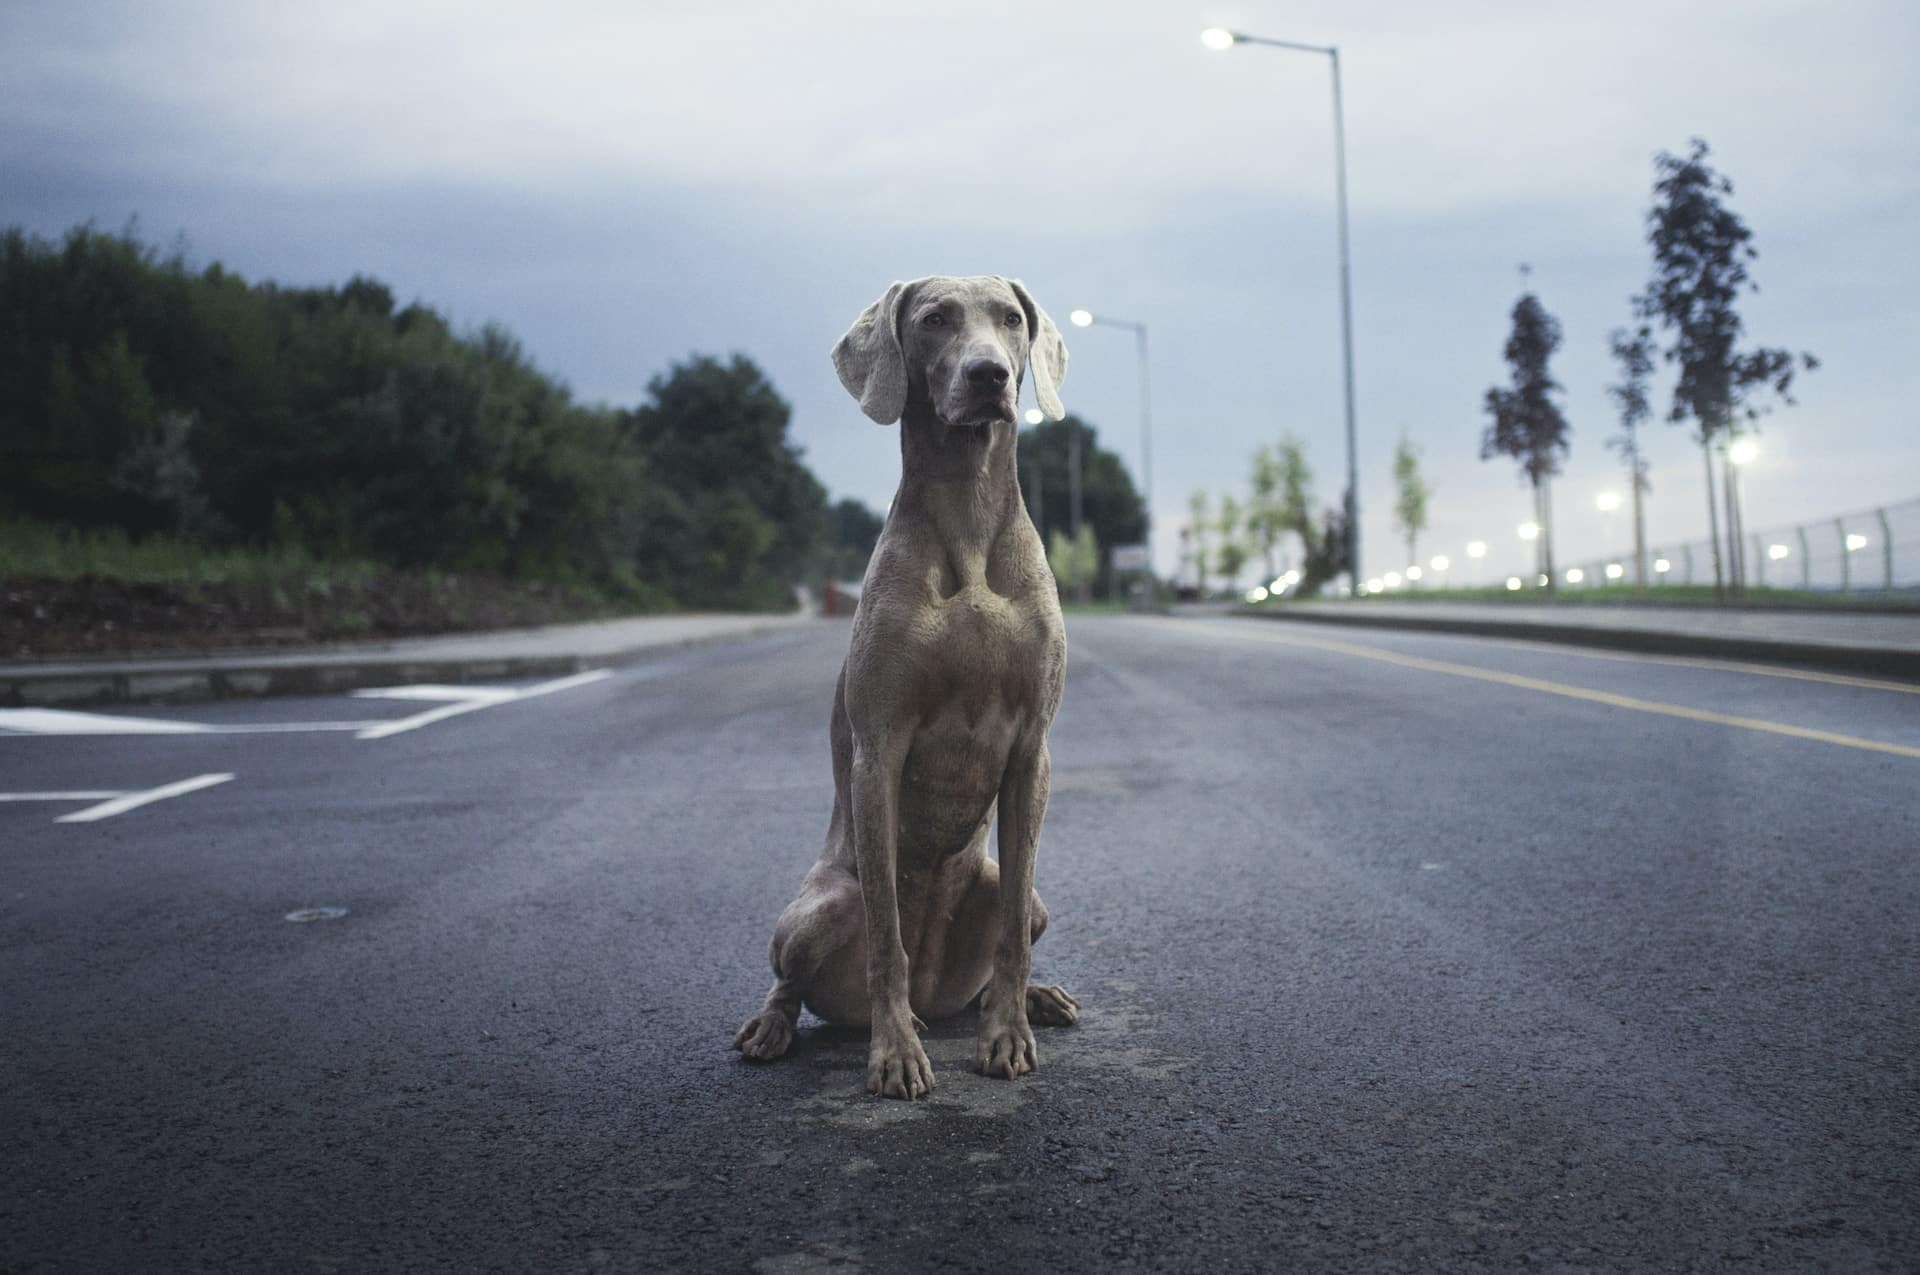 How to find your lost pet like this Weimaraner dog, on a holiday road trip.